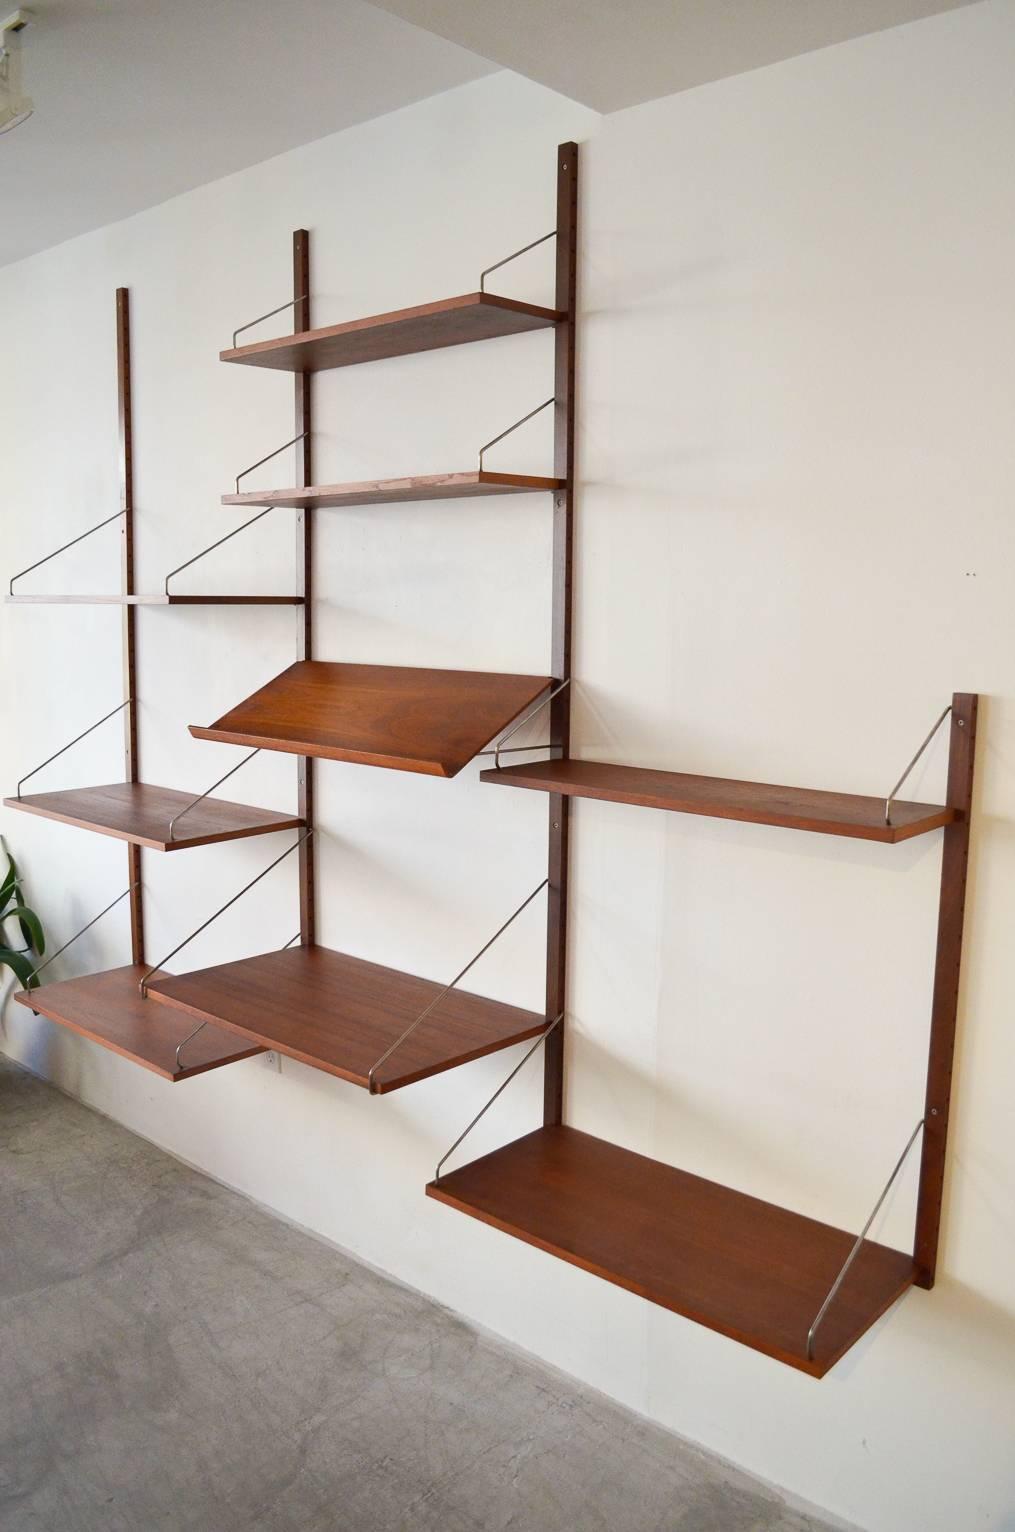 Fully customizable teak shelving or wall unit by Poul Cadovius. Commonly called 'Cado,' designed by Poul Cadovius of Denmark. Very good condition includes all hardware.

Wall-mounted unit includes nine shelves and a hard to find magazine rack and